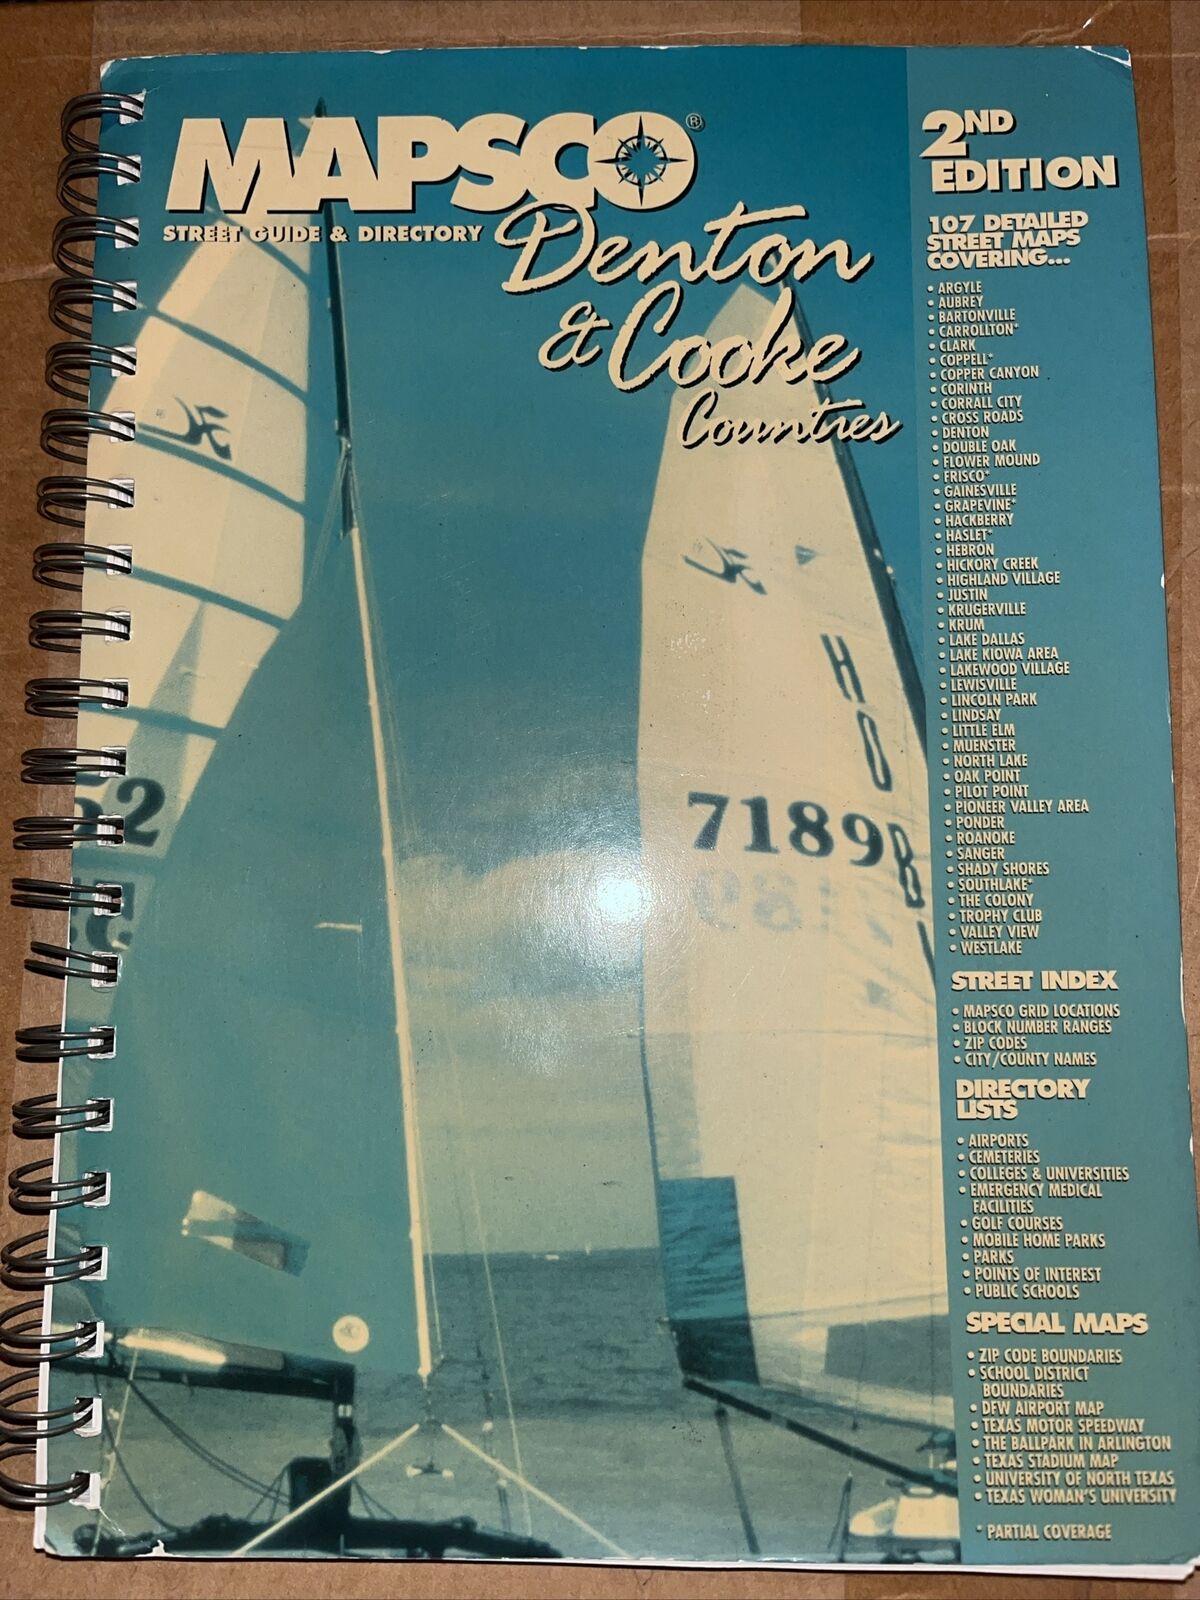 mapsco denton and cooke counties 2nd edition